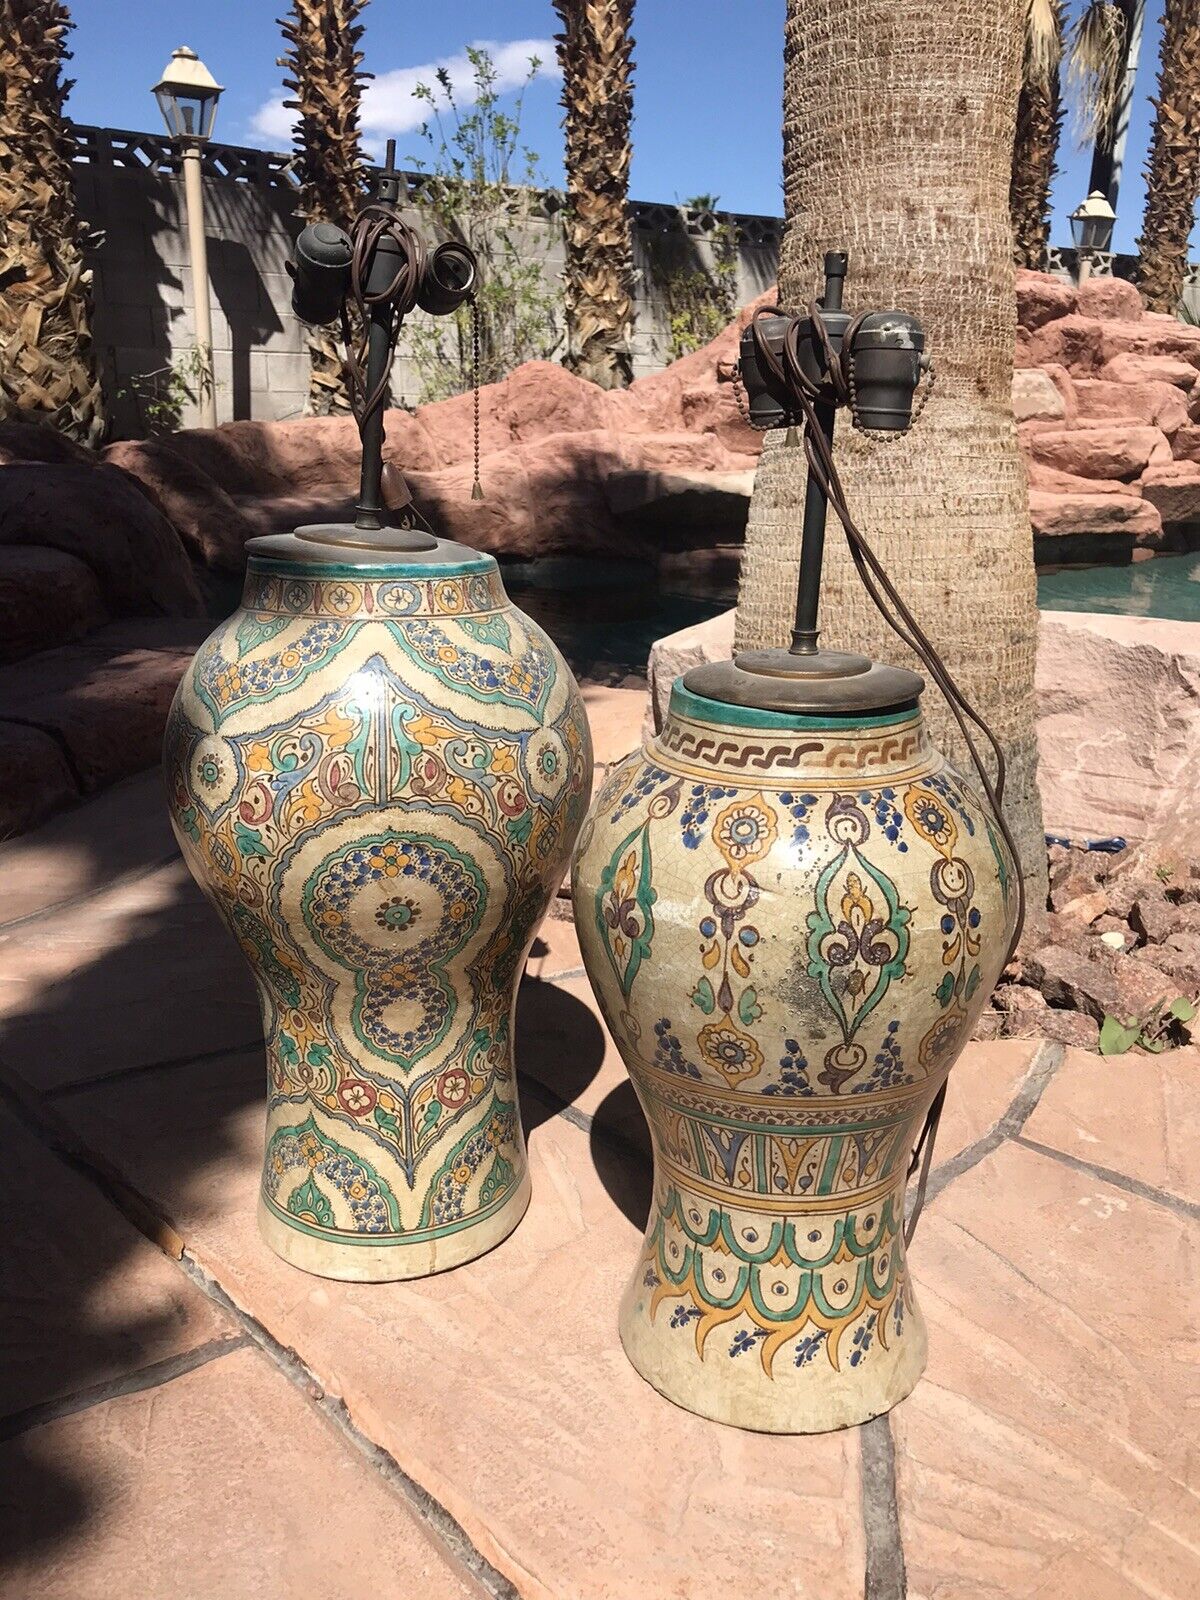 Two original Moroccan outdoor vases converted into lamps beautiful and unique.